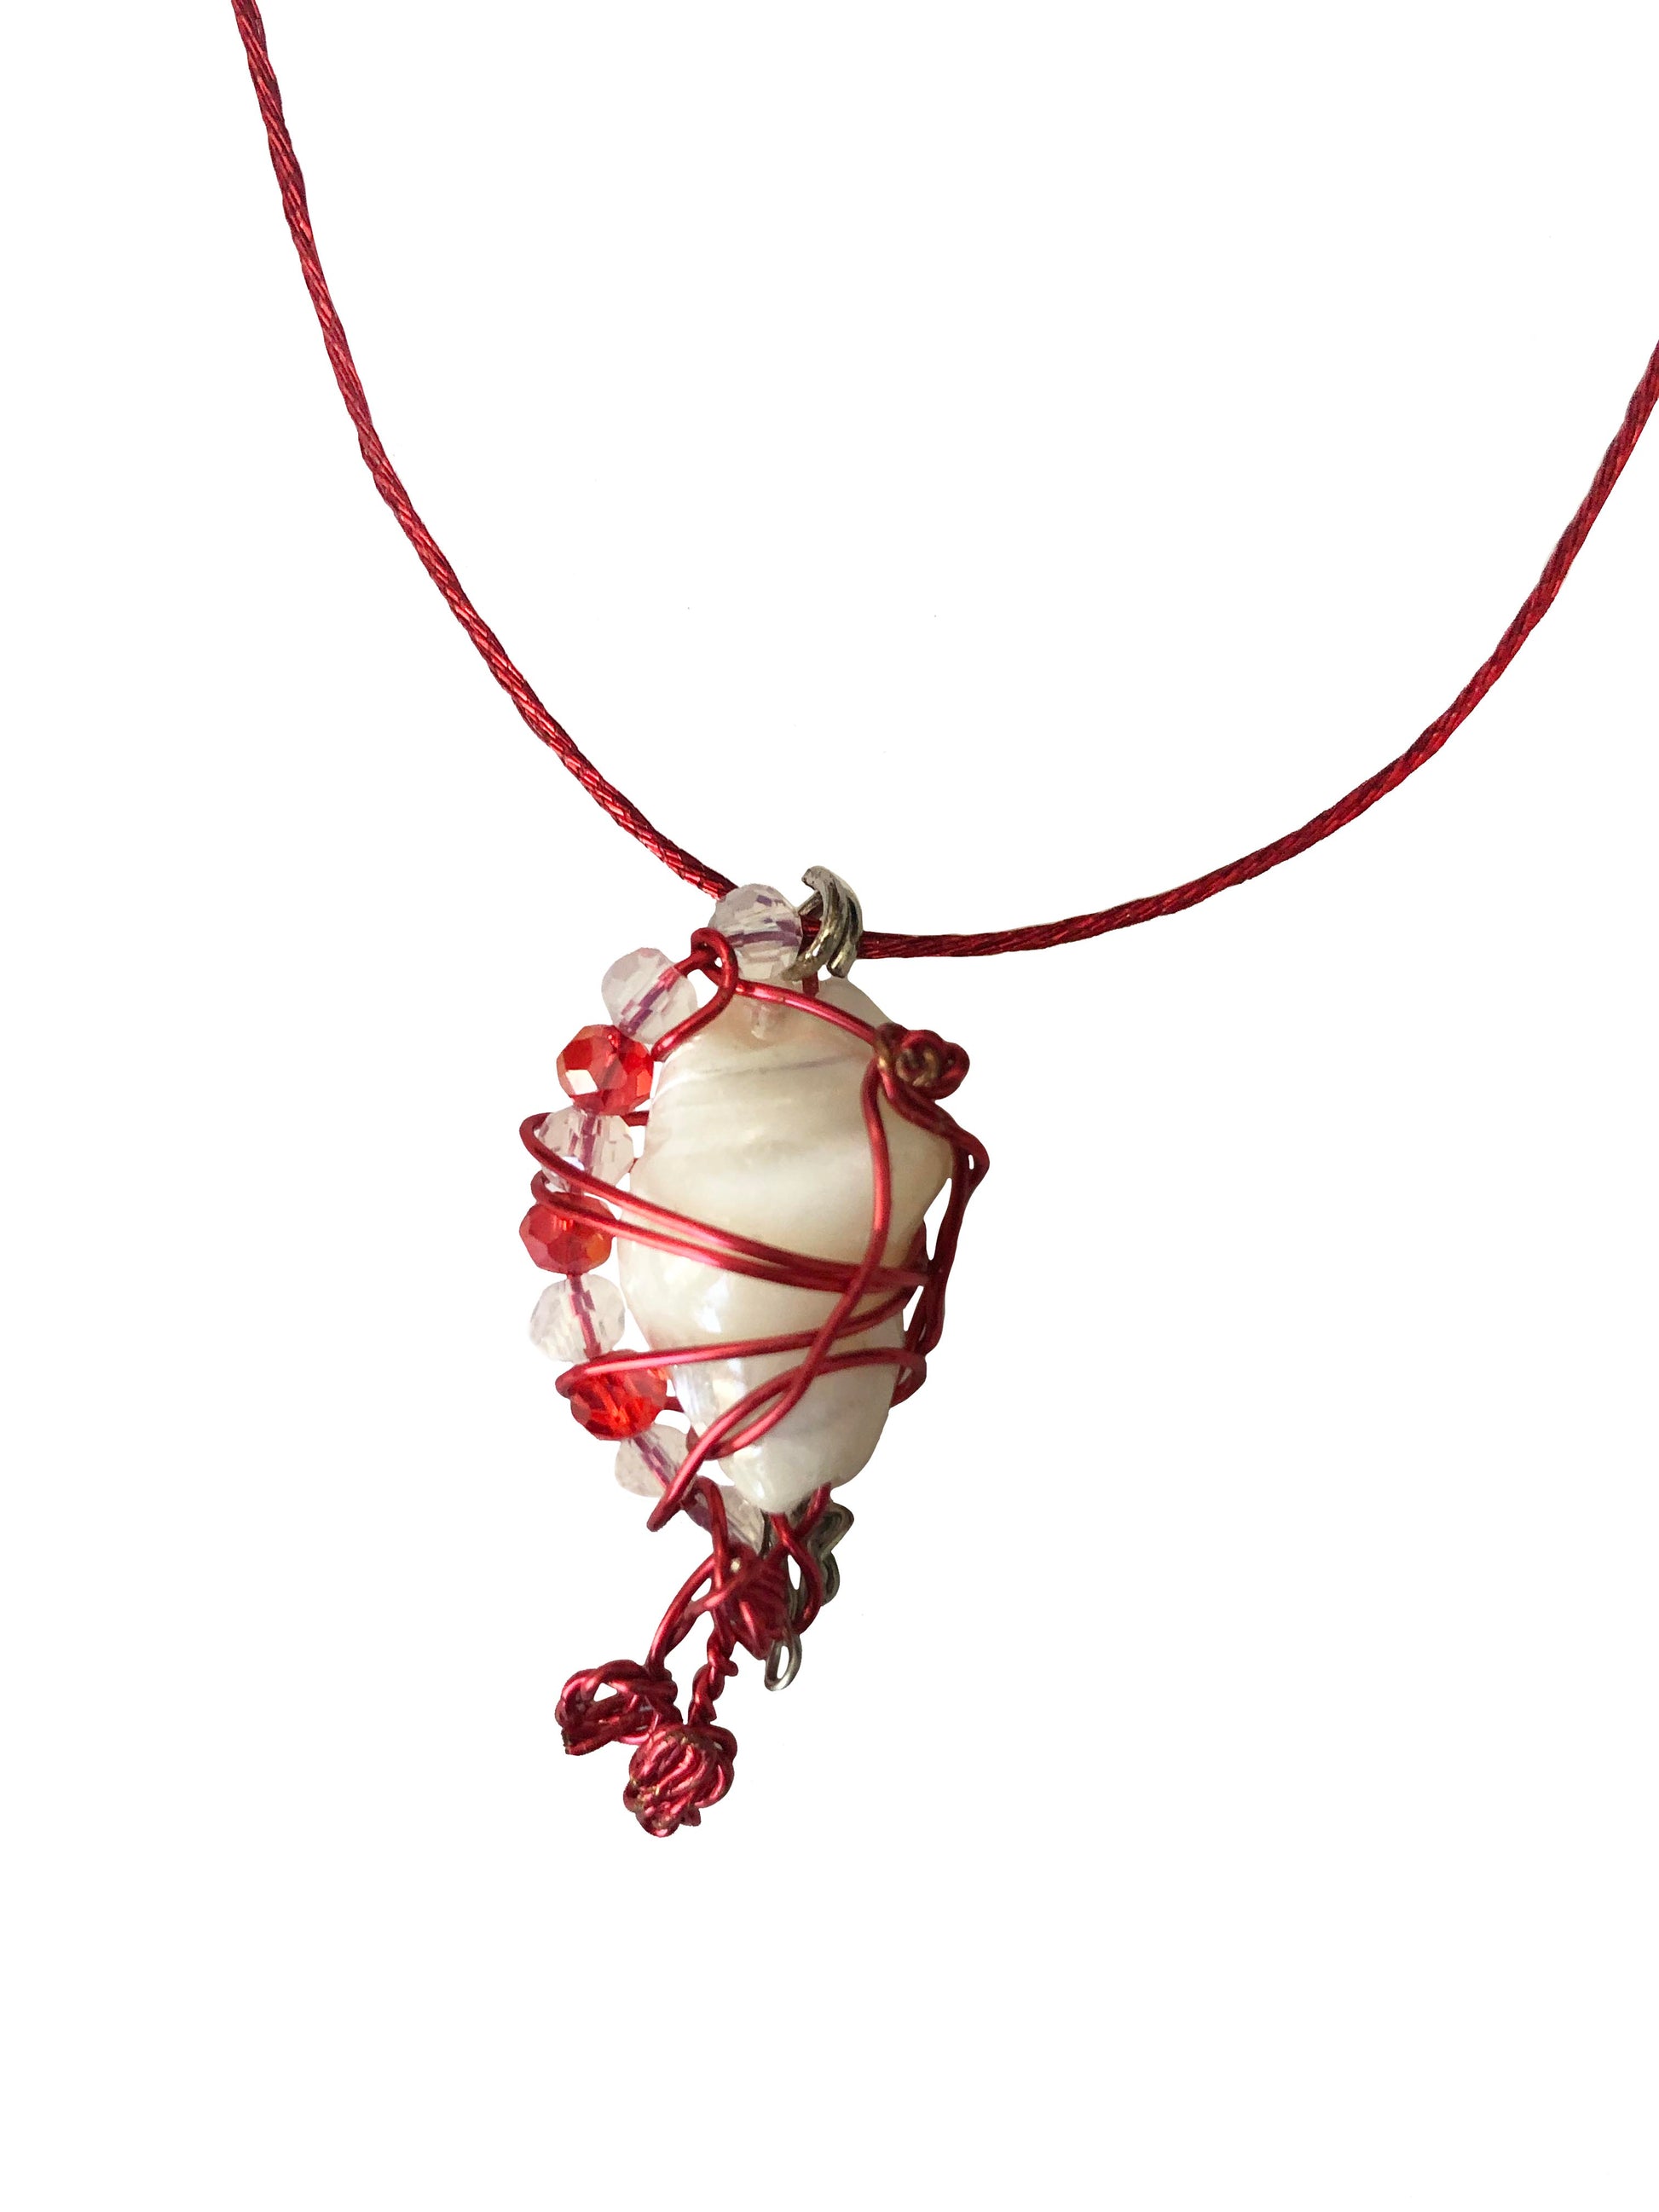 handcrafted red and silver wire wrapped seashell pendant with clear and red crystal beads and adjustable knot ties.